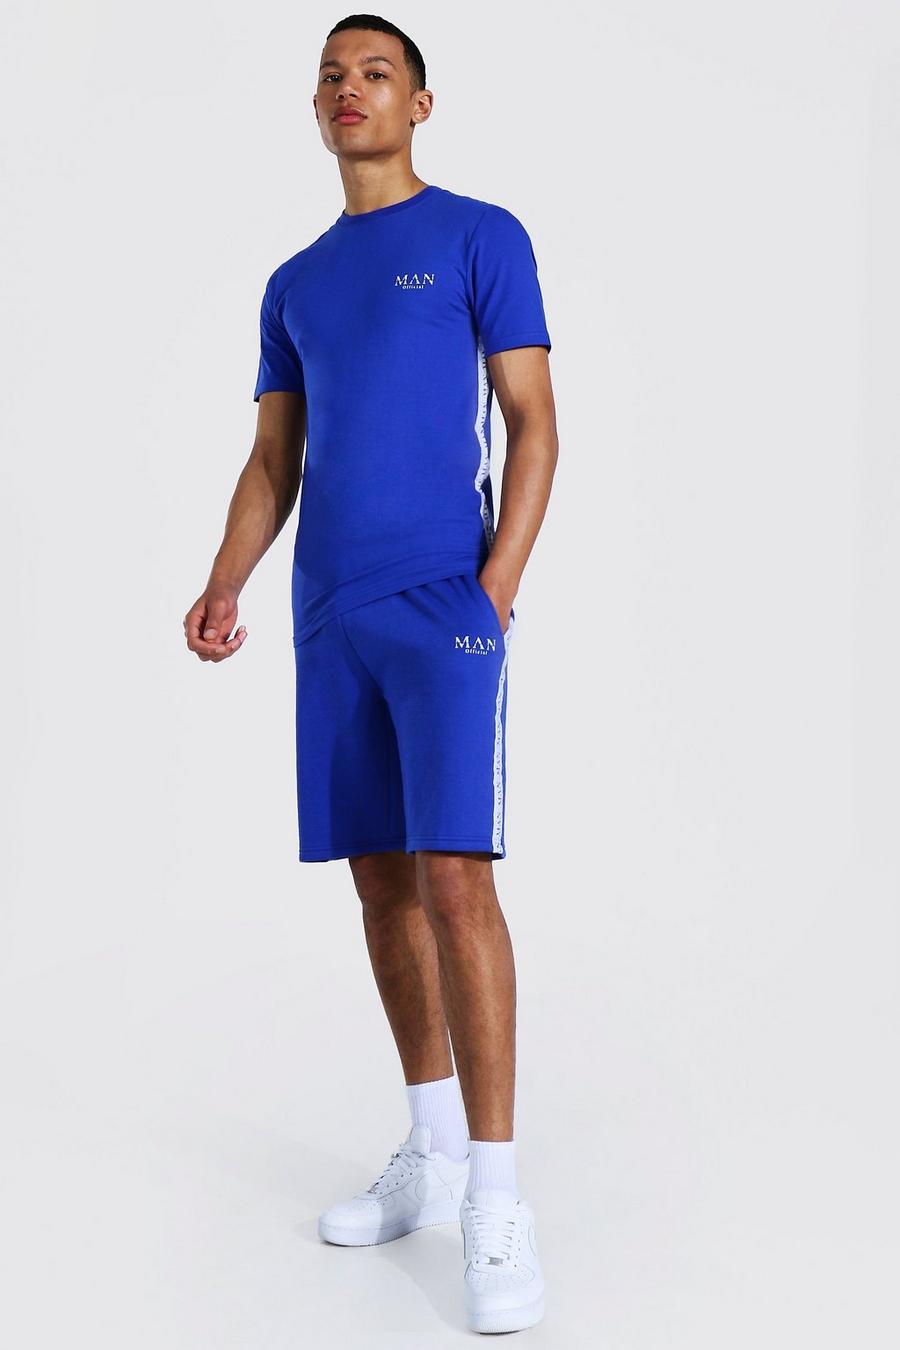 Cobalt Tall Muscle Fit Man Tshirt And Short Set image number 1